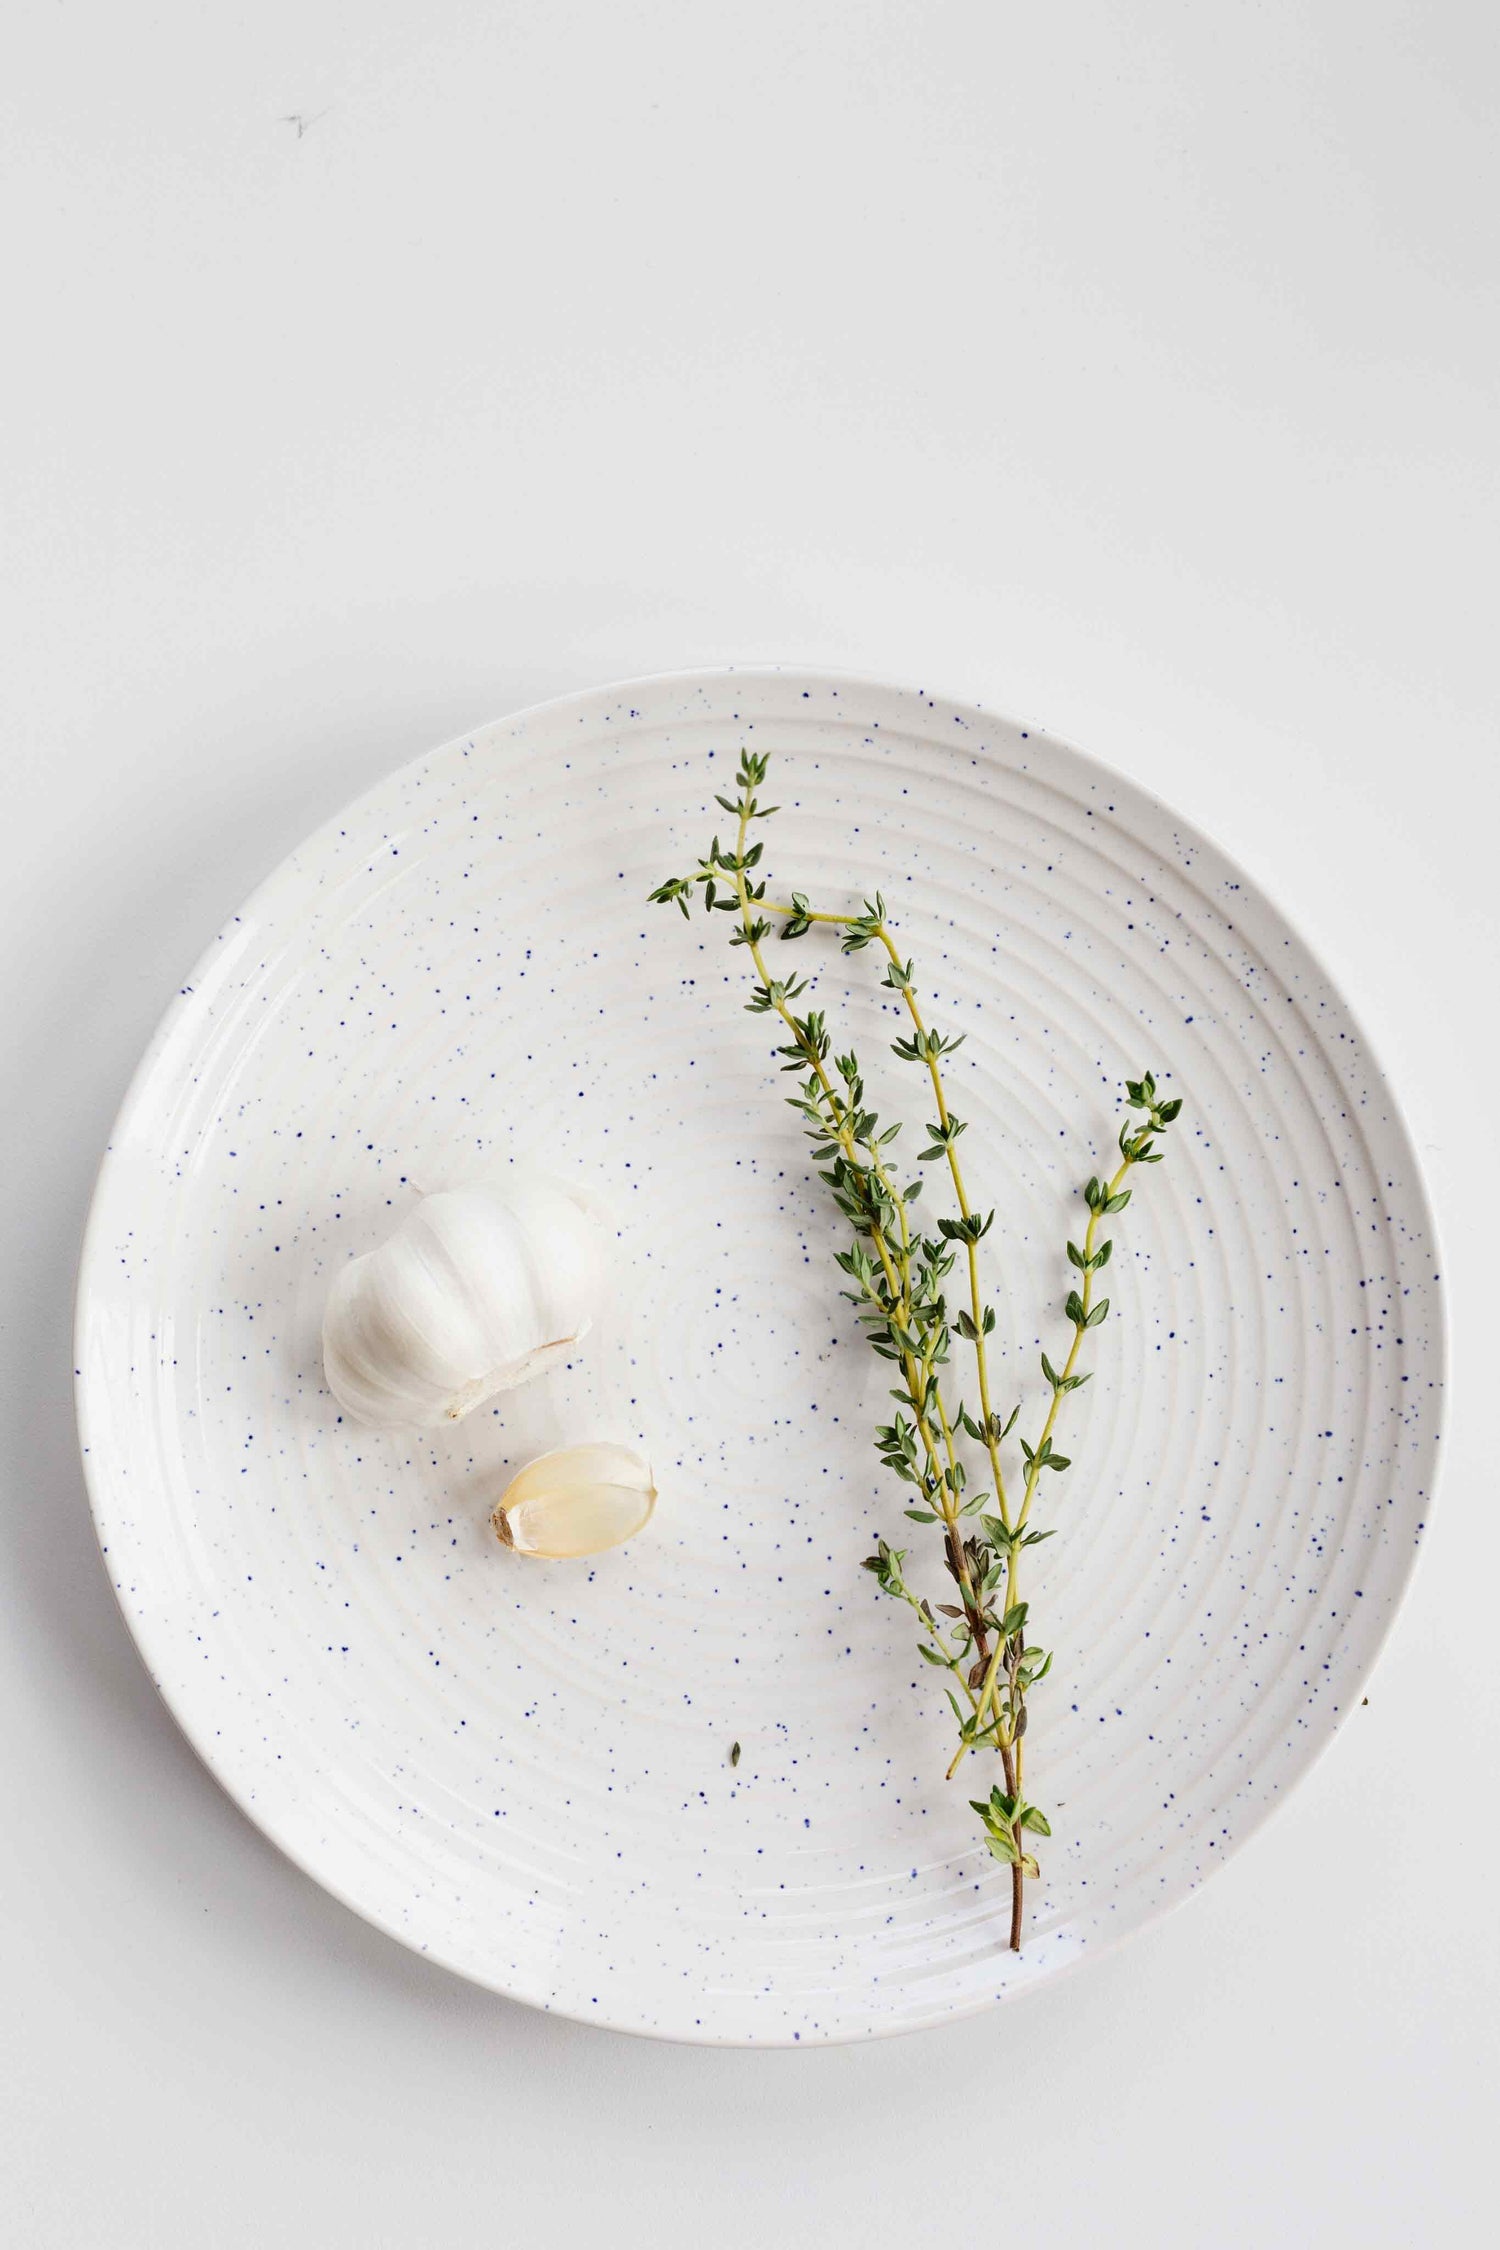 Fresh garlic and thyme neatly arranged on a white plate.